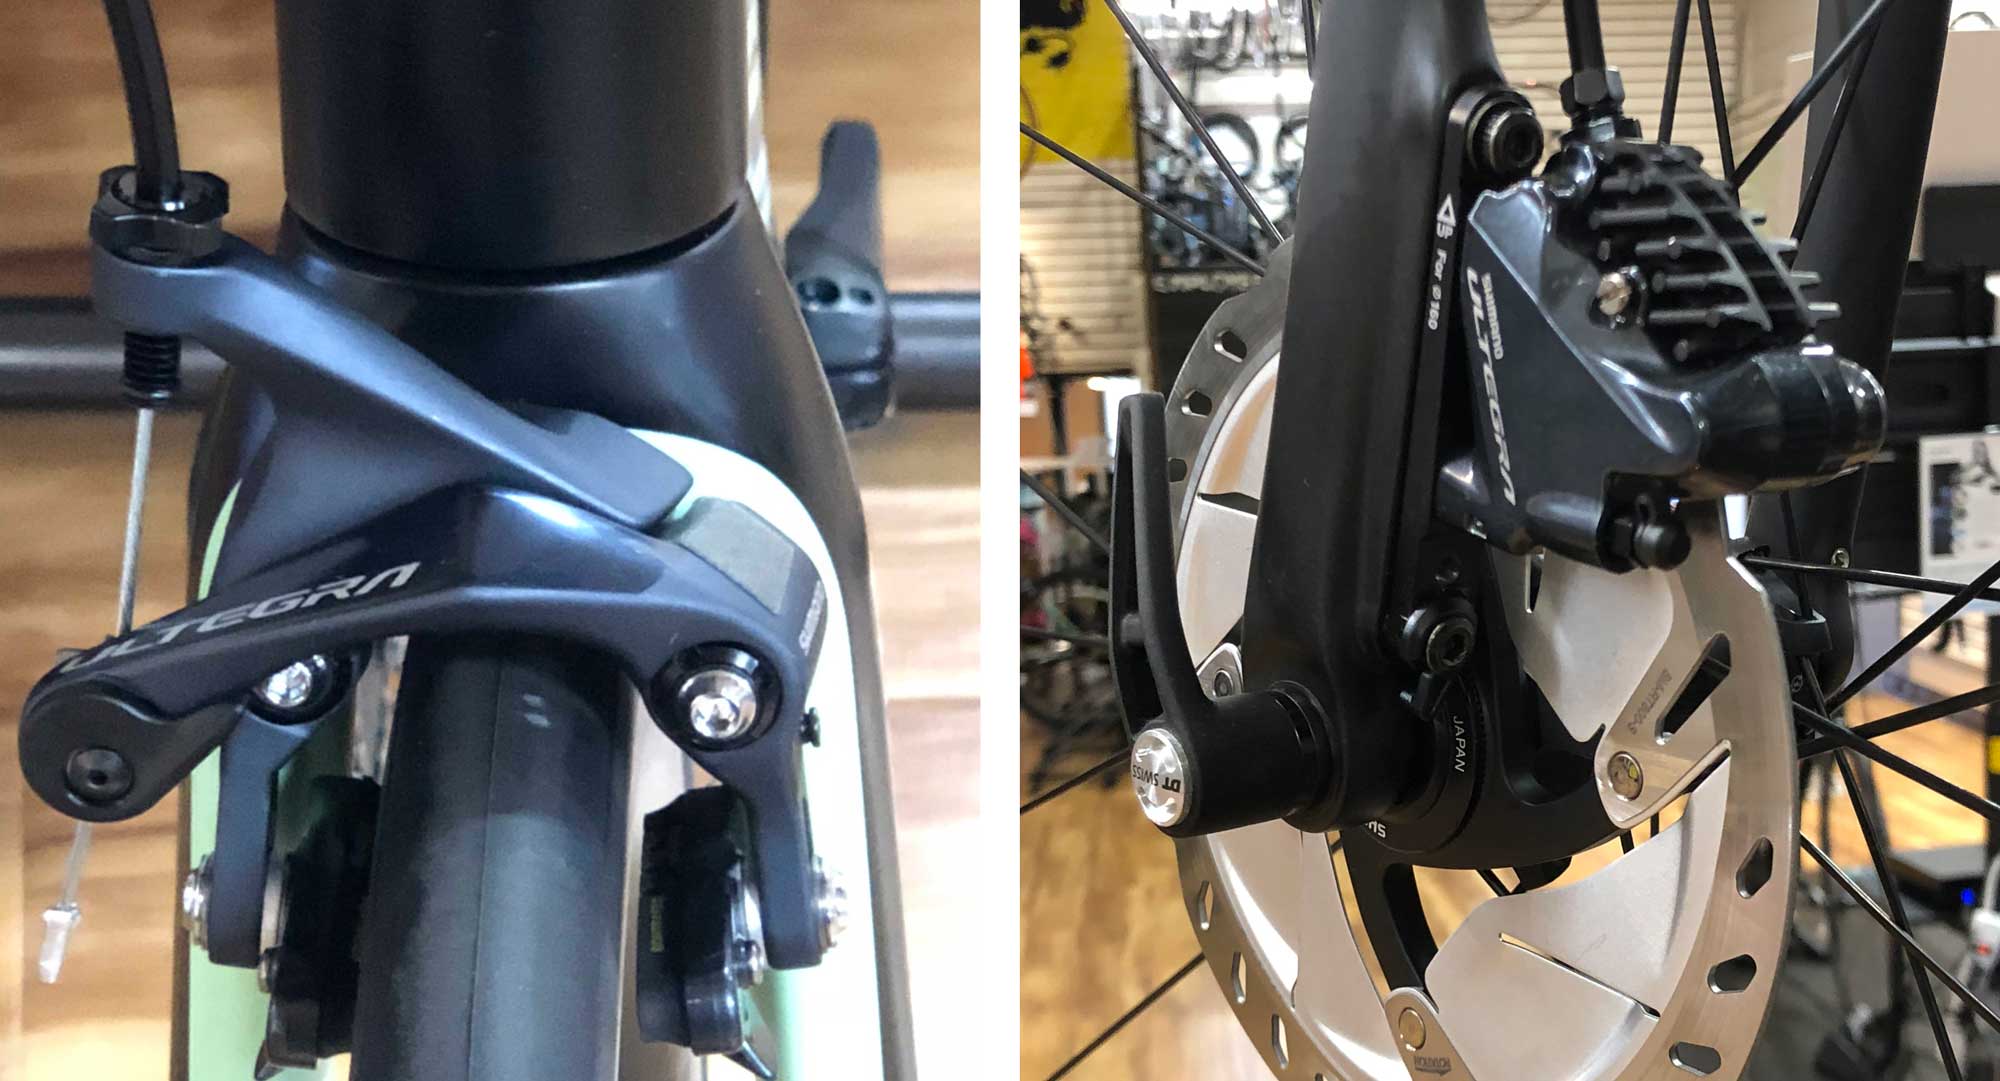 Rim brake mounted on a bicycle compared to a disc brake mounted on a similar bicycle